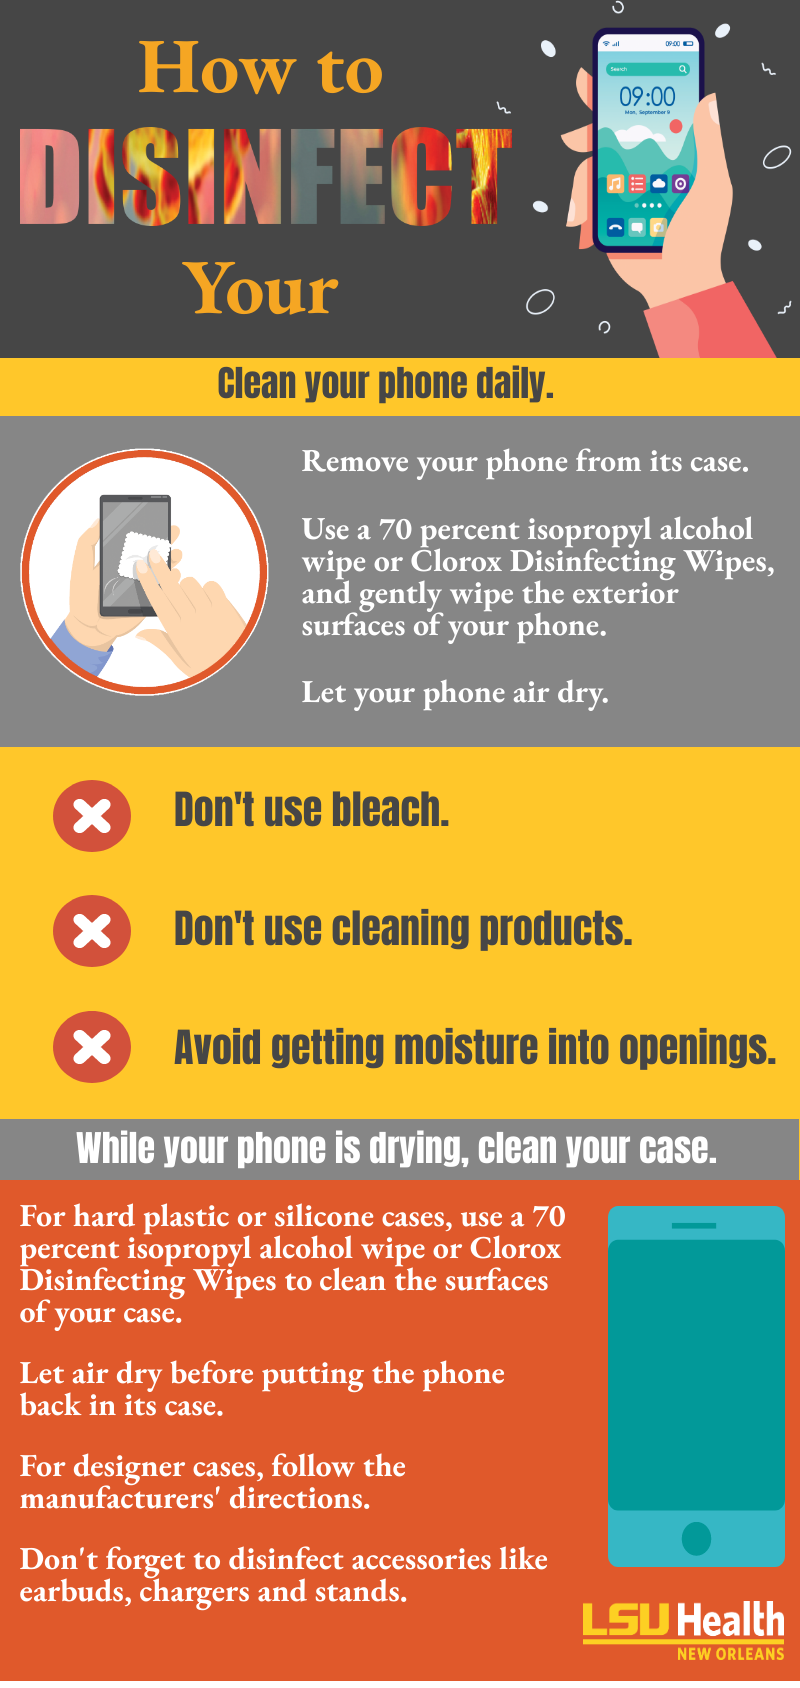 Disinfect Your Cellphone